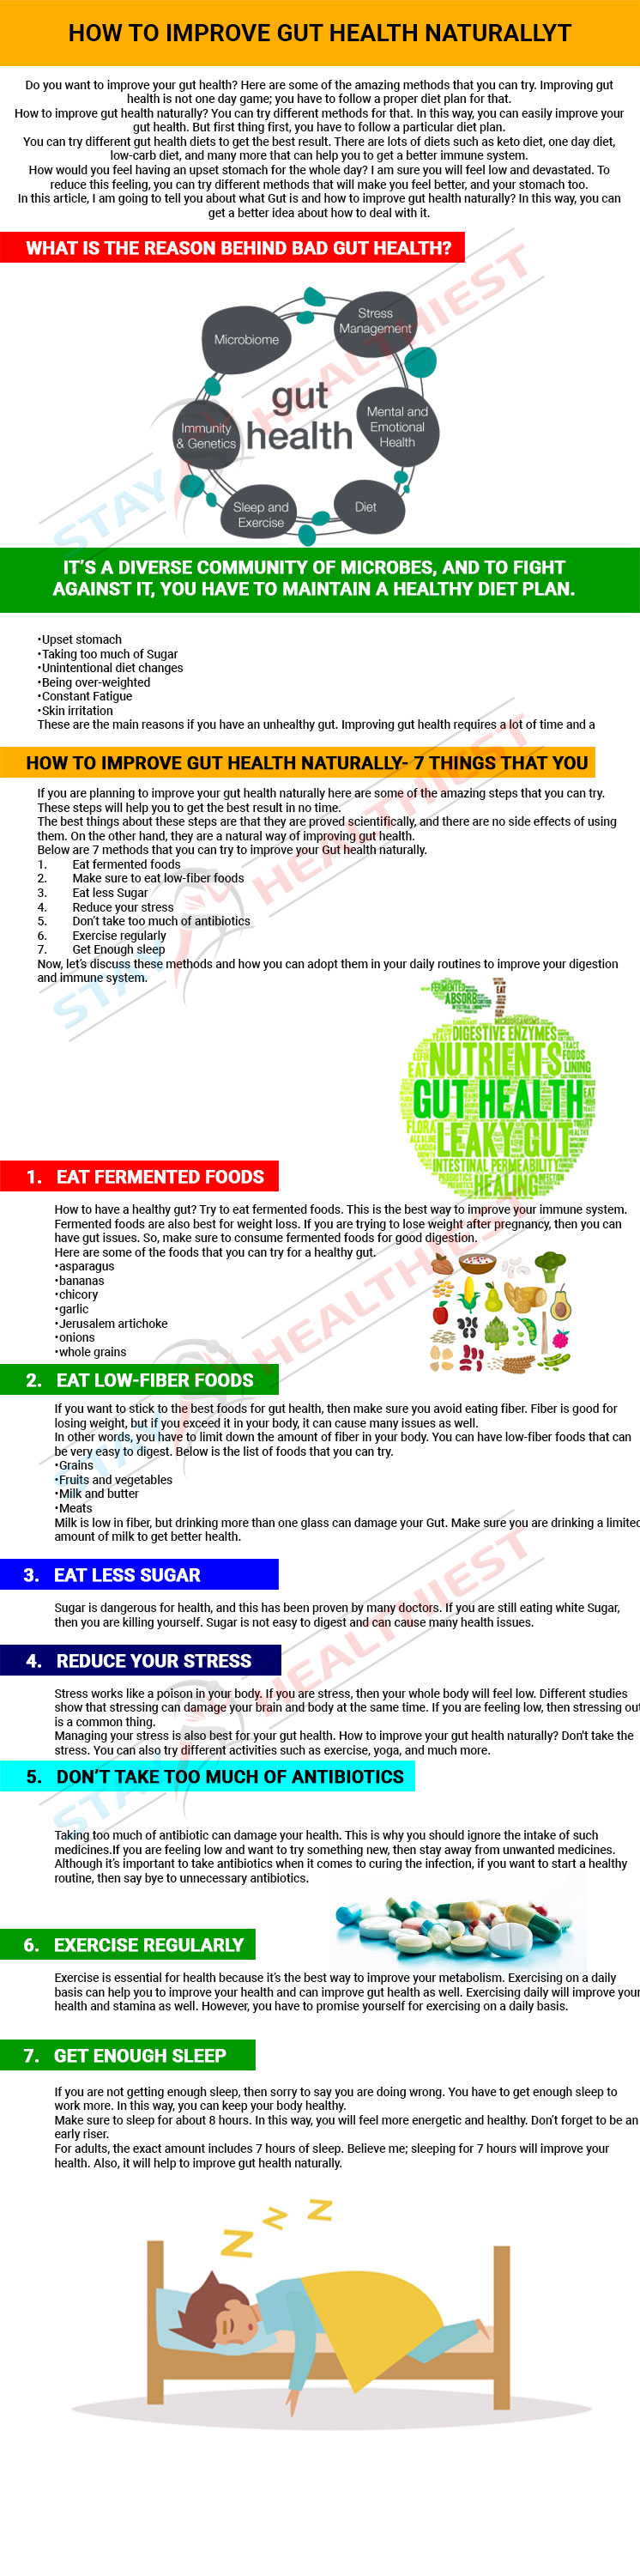 How to improve Gut Health Naturally